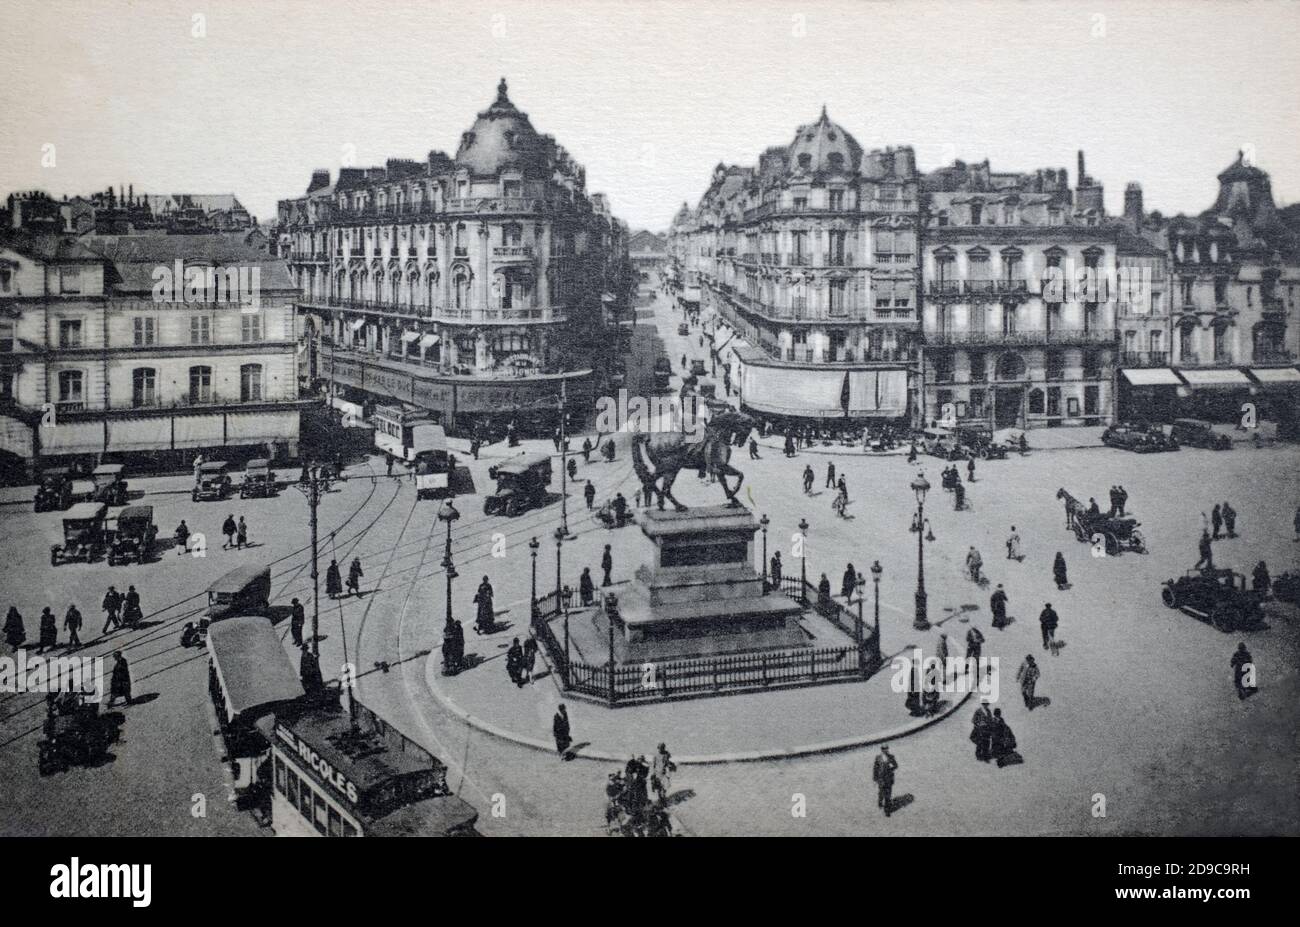 A historical view of the Joan of Arc statue and the Place du Martroi with the Rue de la République behind leading to the train station in Orléans, Centre-Val de Loire, France, taken from a postcard c.early 1900s. Stock Photo